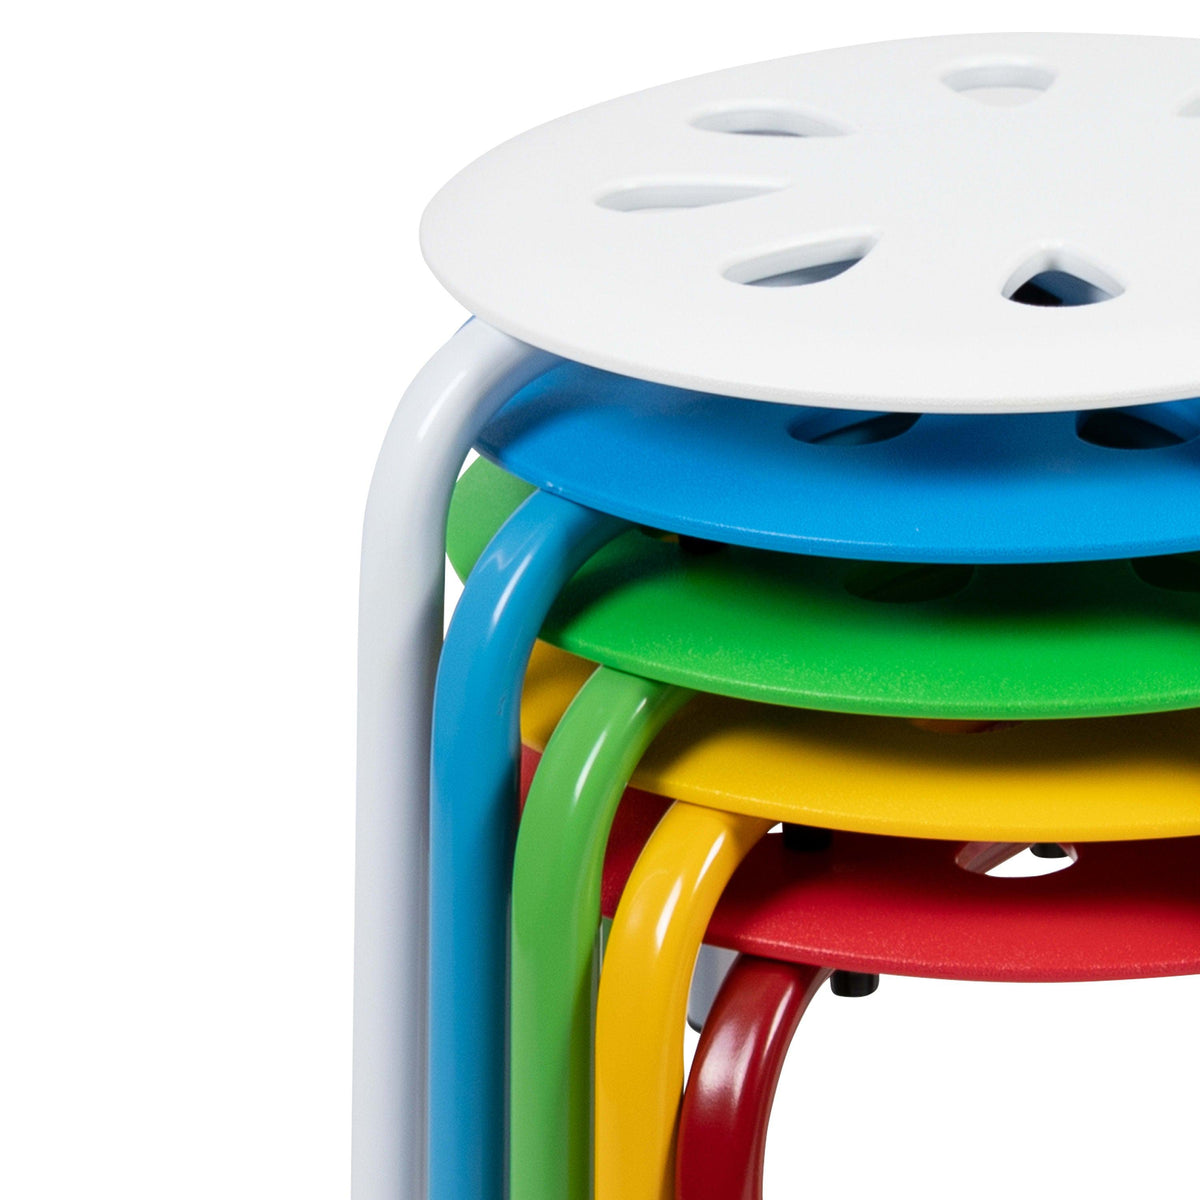 Assorted |#| Plastic Nesting Stack Stools-School/Home, 17.5inchHeight, Assorted Colors (5 Pack)